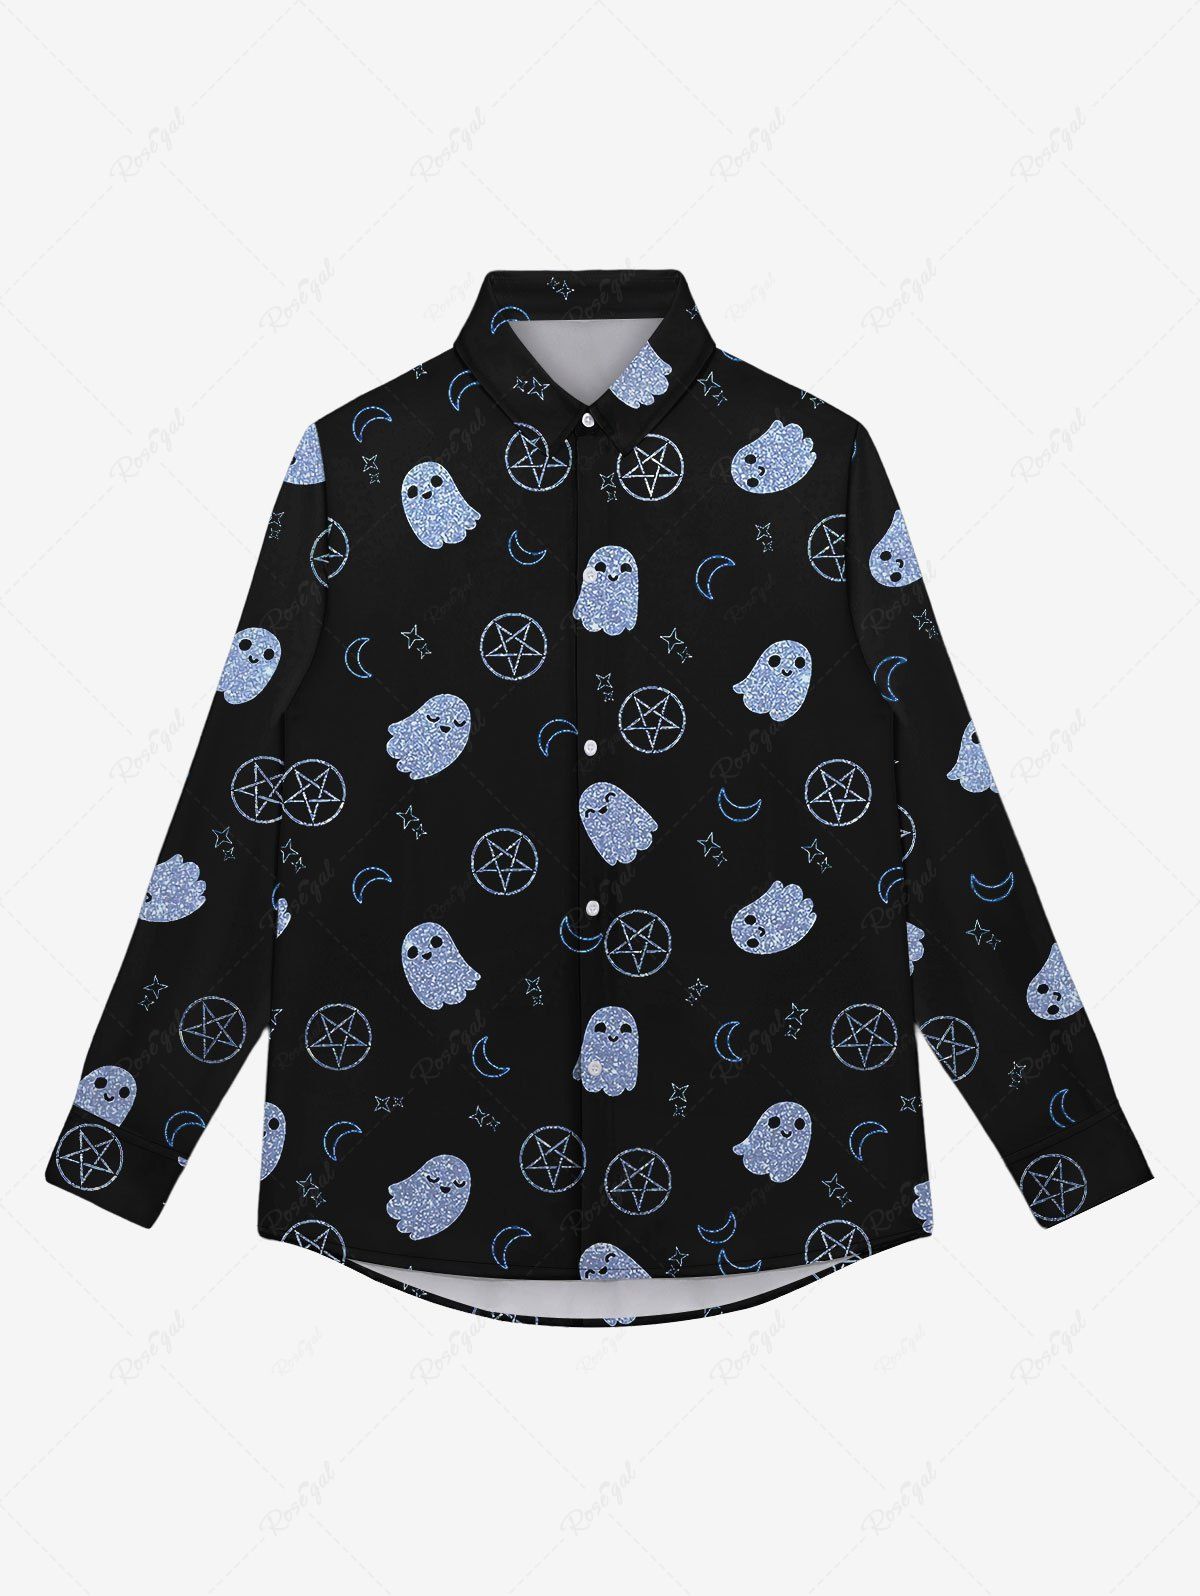 Hot Gothic Turn-down Collar Cute Ghost Moon Star Printed Buttons Shirt For Men  